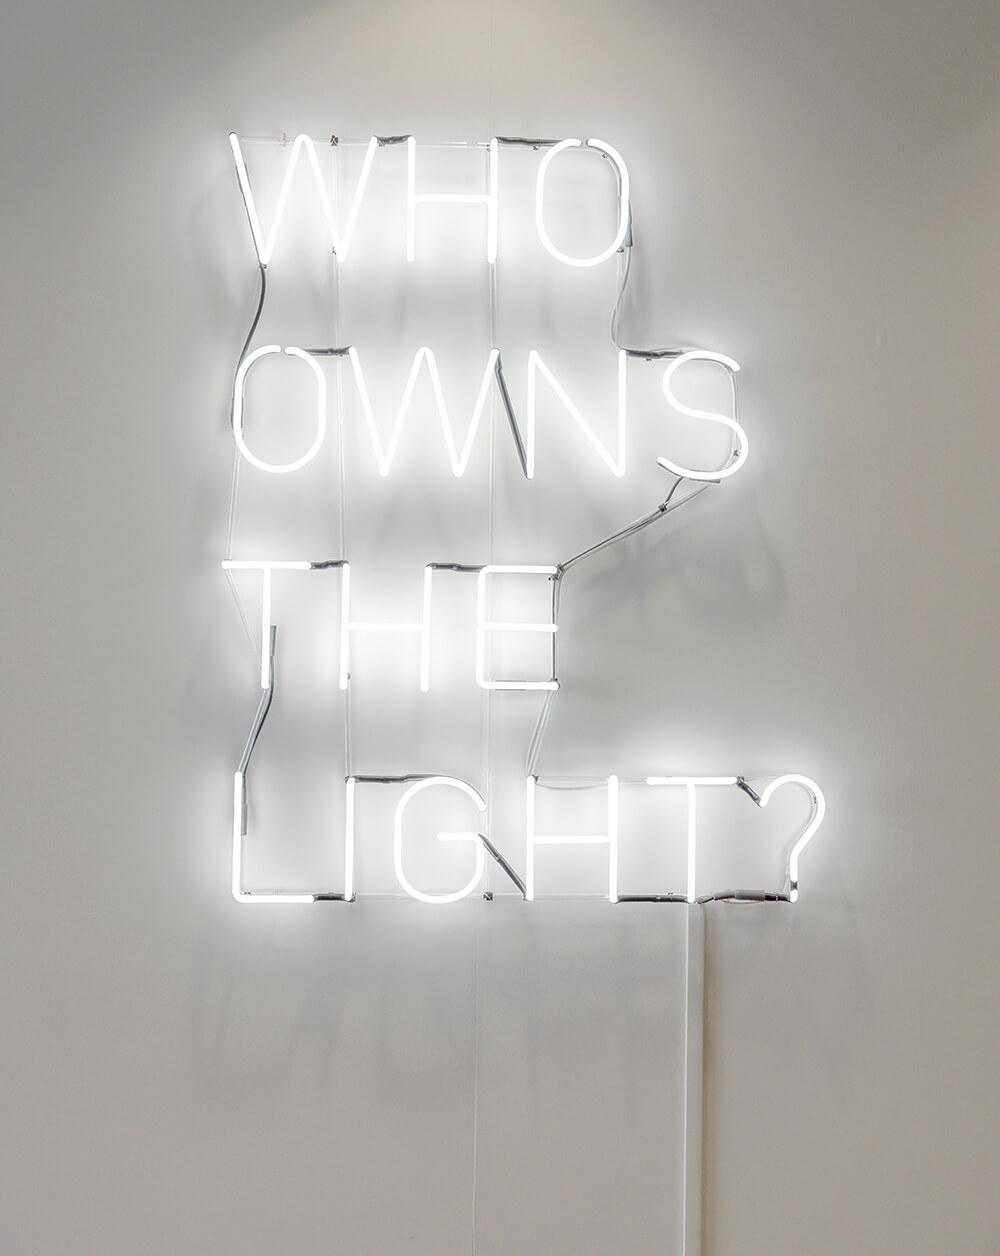 neon sign on a white wall with words stacks vertically that read, WHO OWNS THE LIGHT